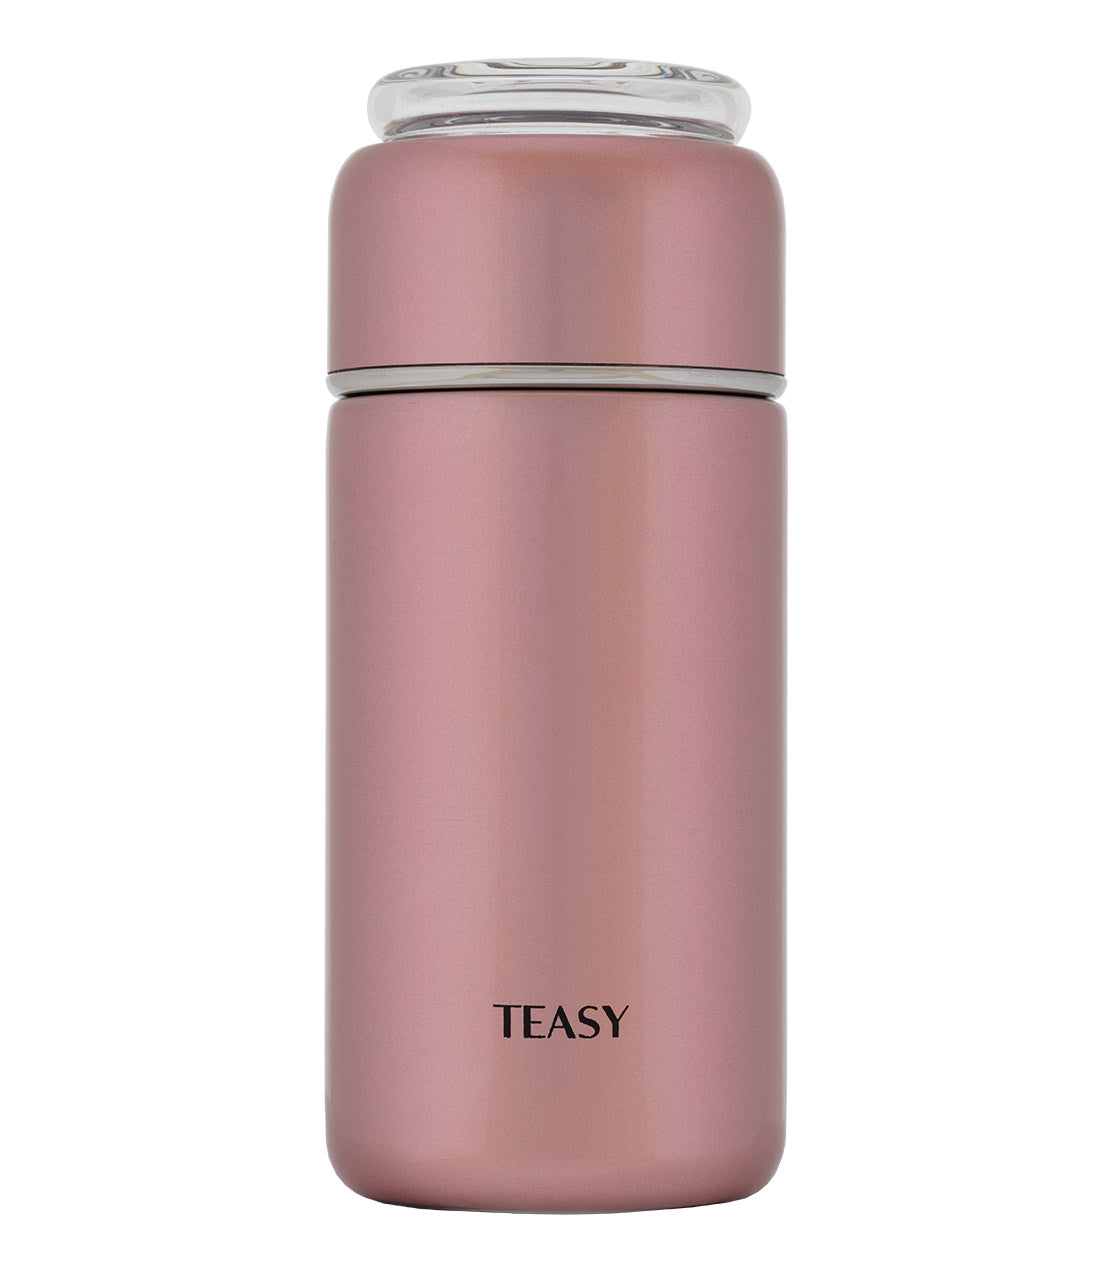 Teasy Insulated Flask (Multiple Colors) - 9 oz. Rose Gold - Harney & Sons Fine Teas